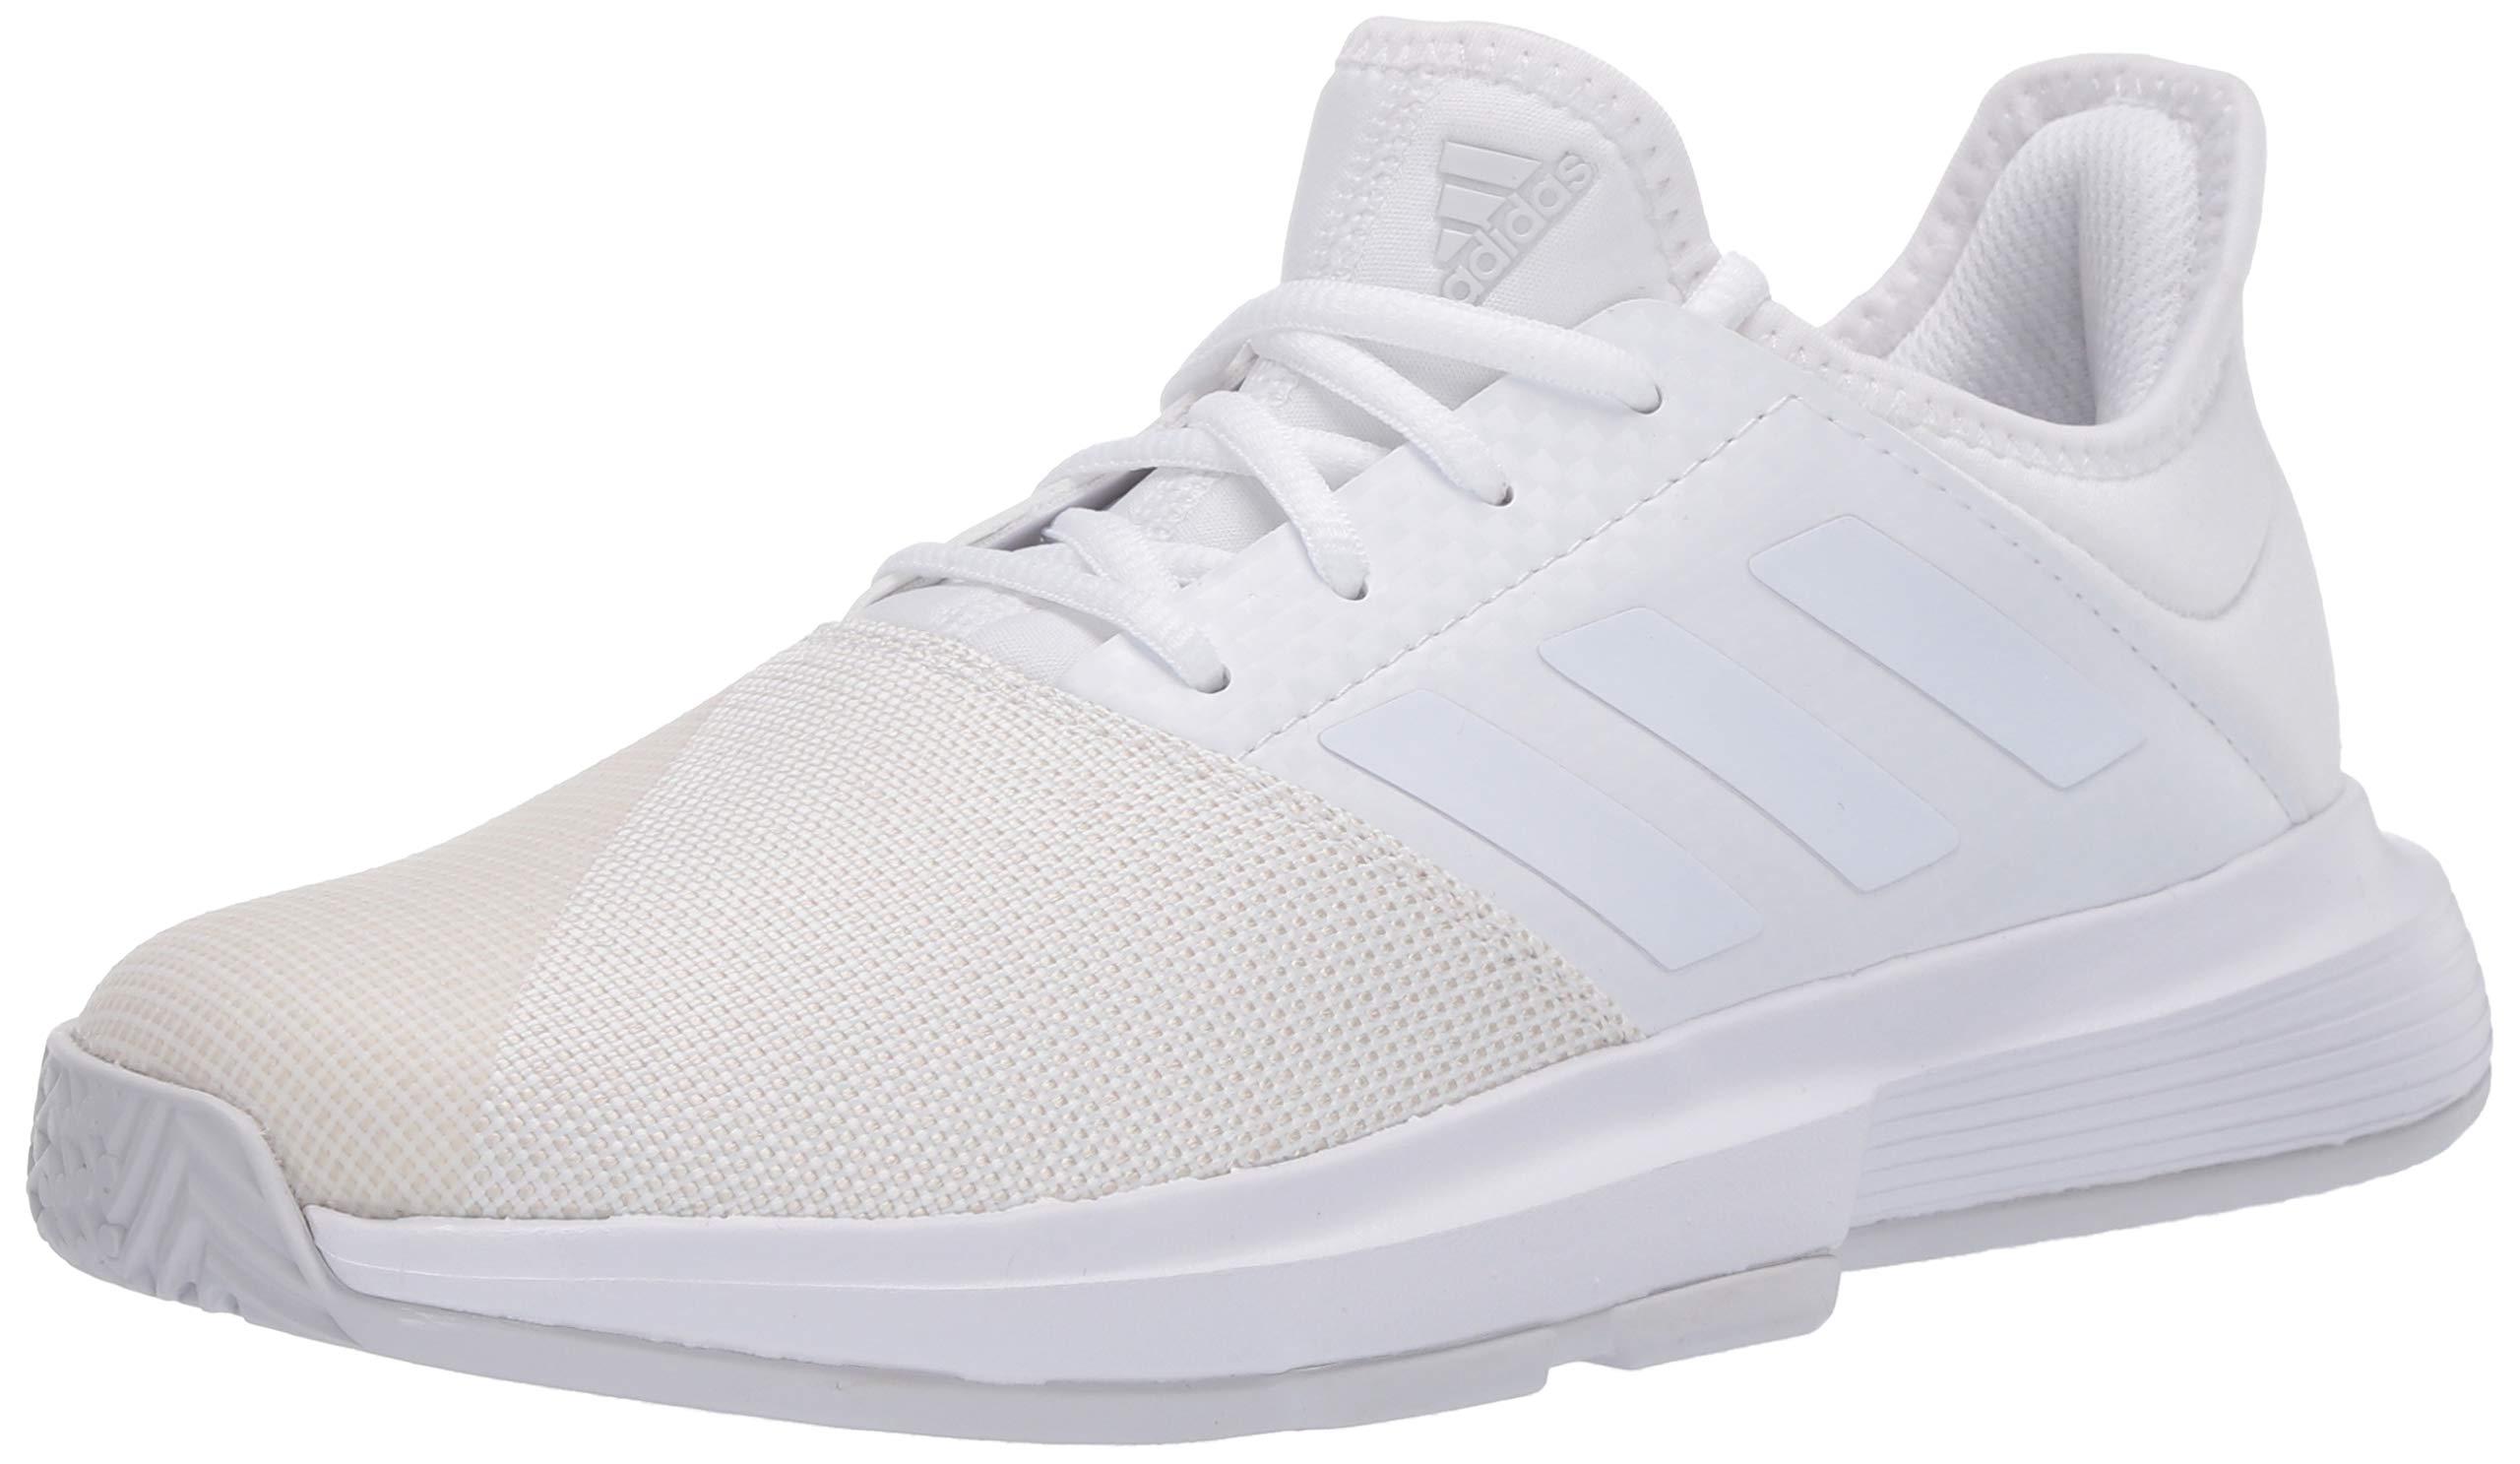 adidas Gamecourt Tennis Shoes in White/Silver (White) - Save 49% - Lyst